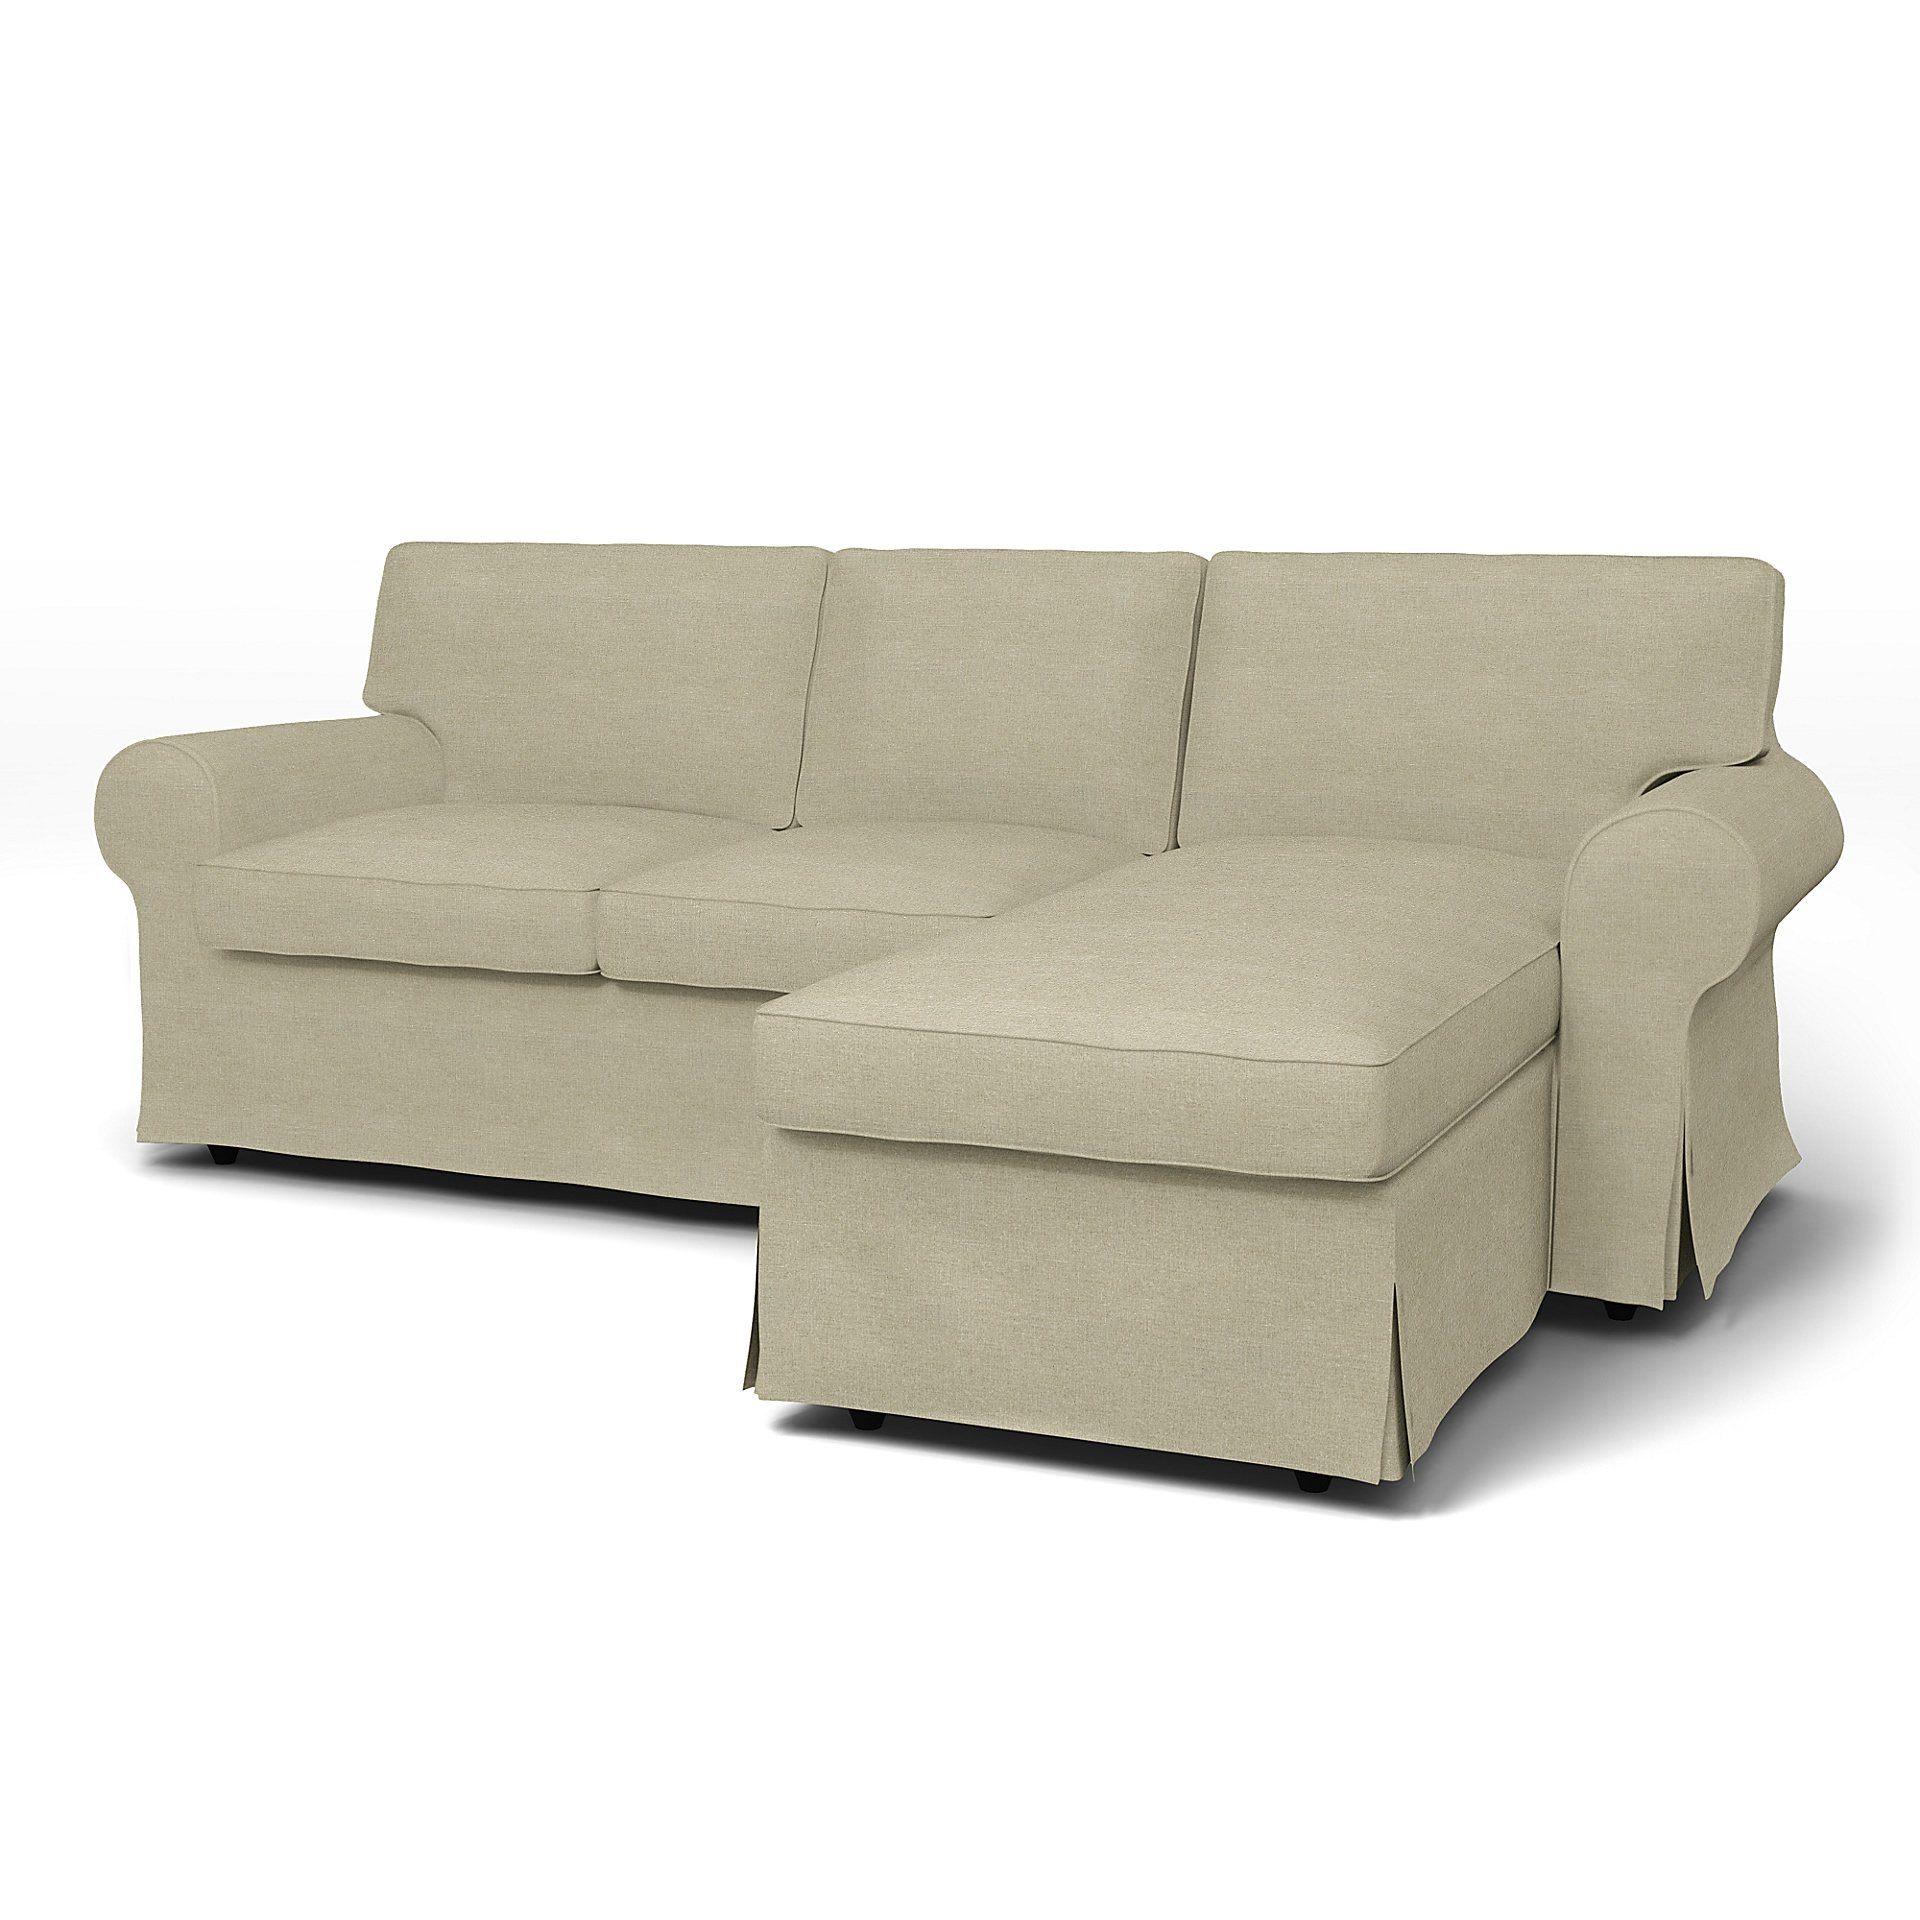 IKEA - Ektorp 3 Seater Sofa with Chaise Cover, Pebble, Linen - Bemz